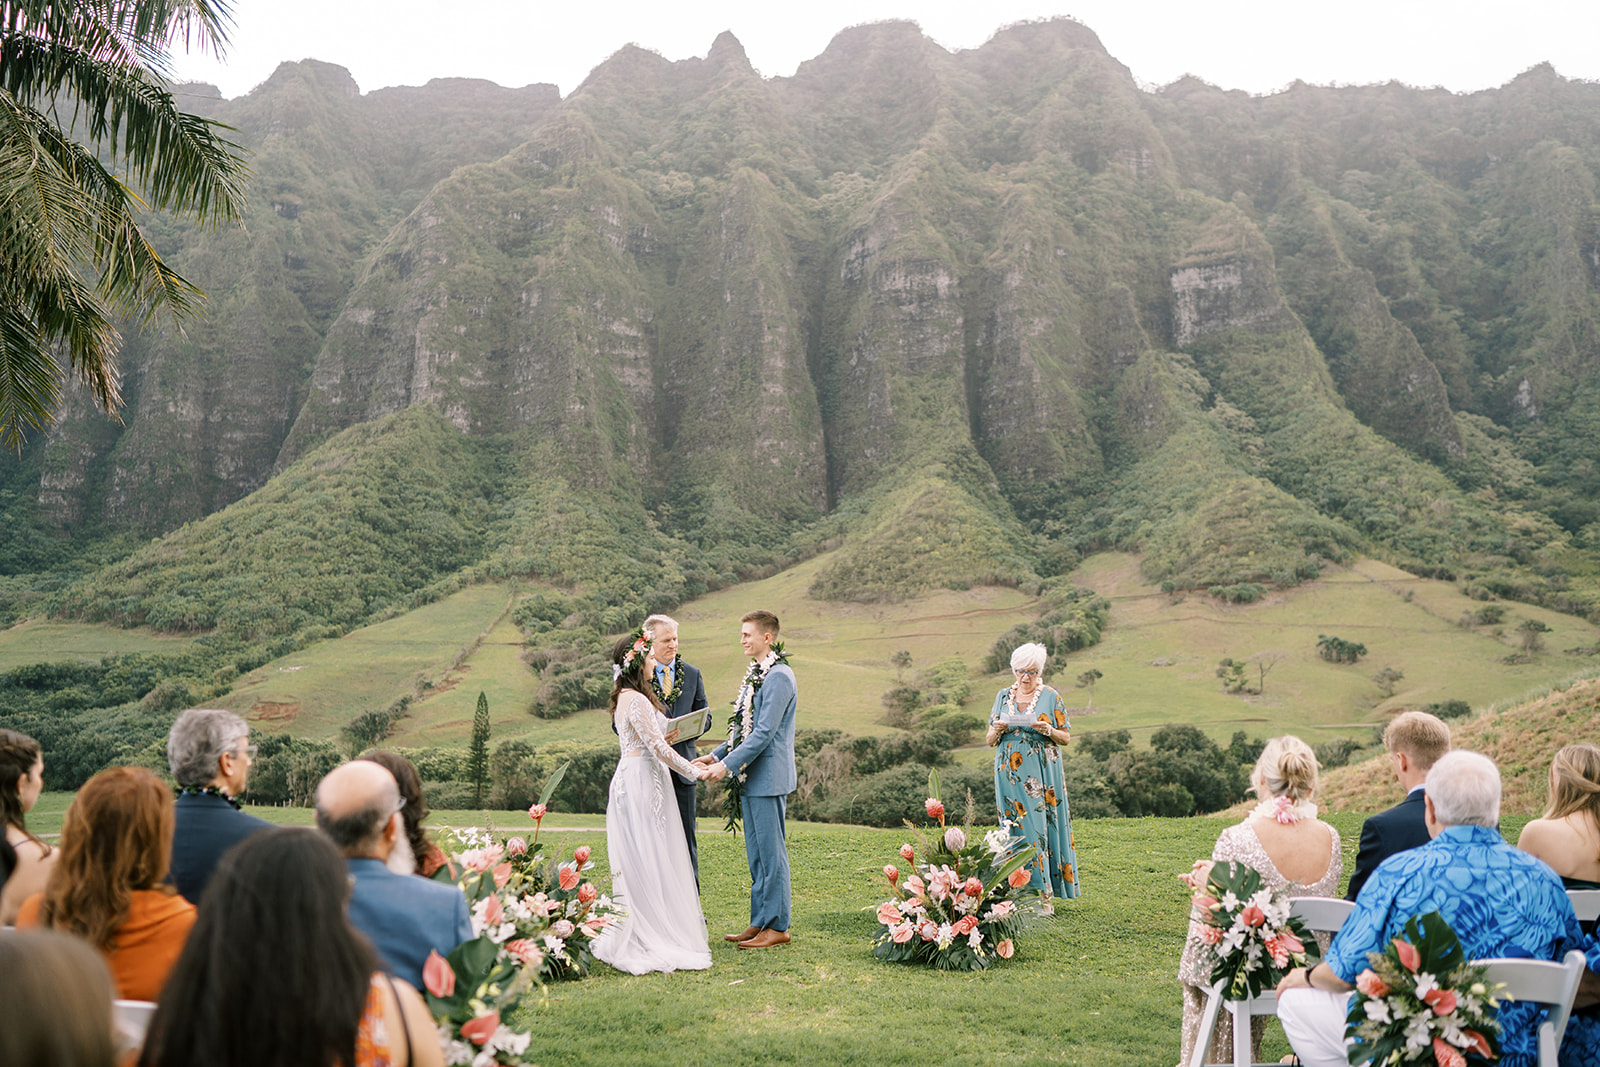 Hawaiian wedding ceremony on a field with the mountains in the background.